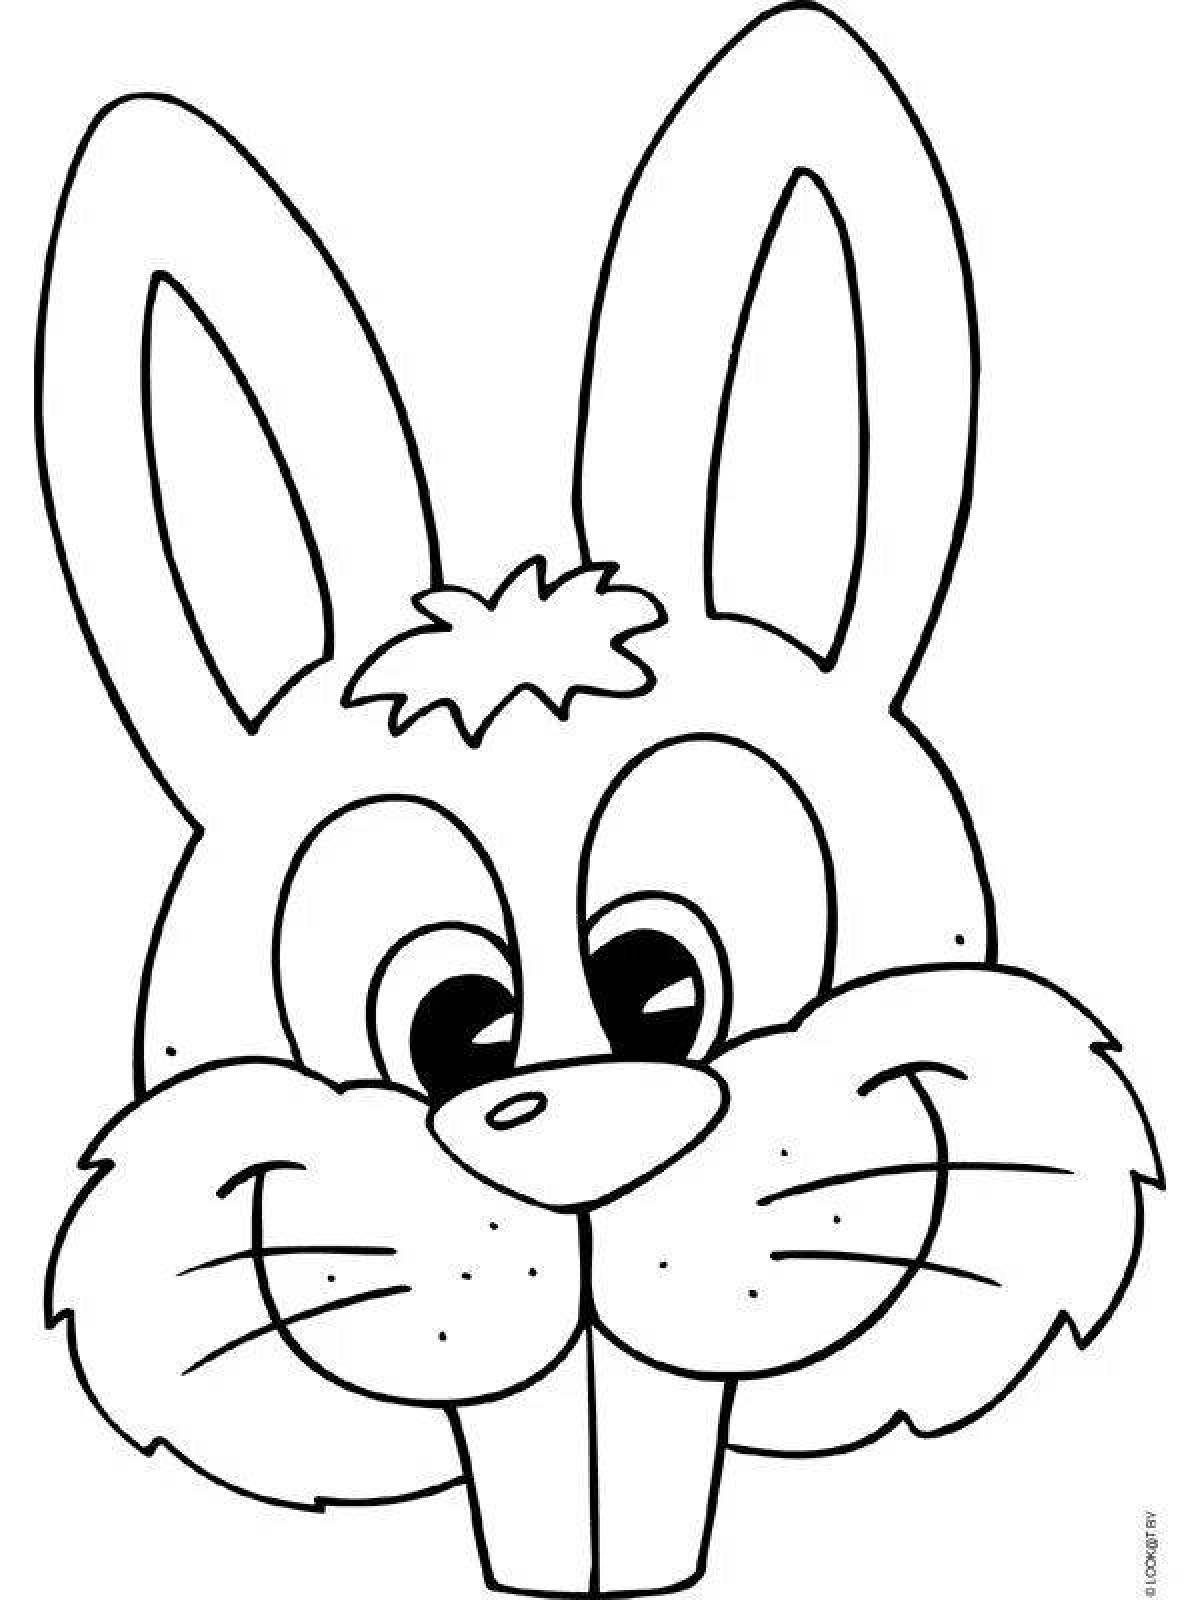 Coloring page dramatic hare mask